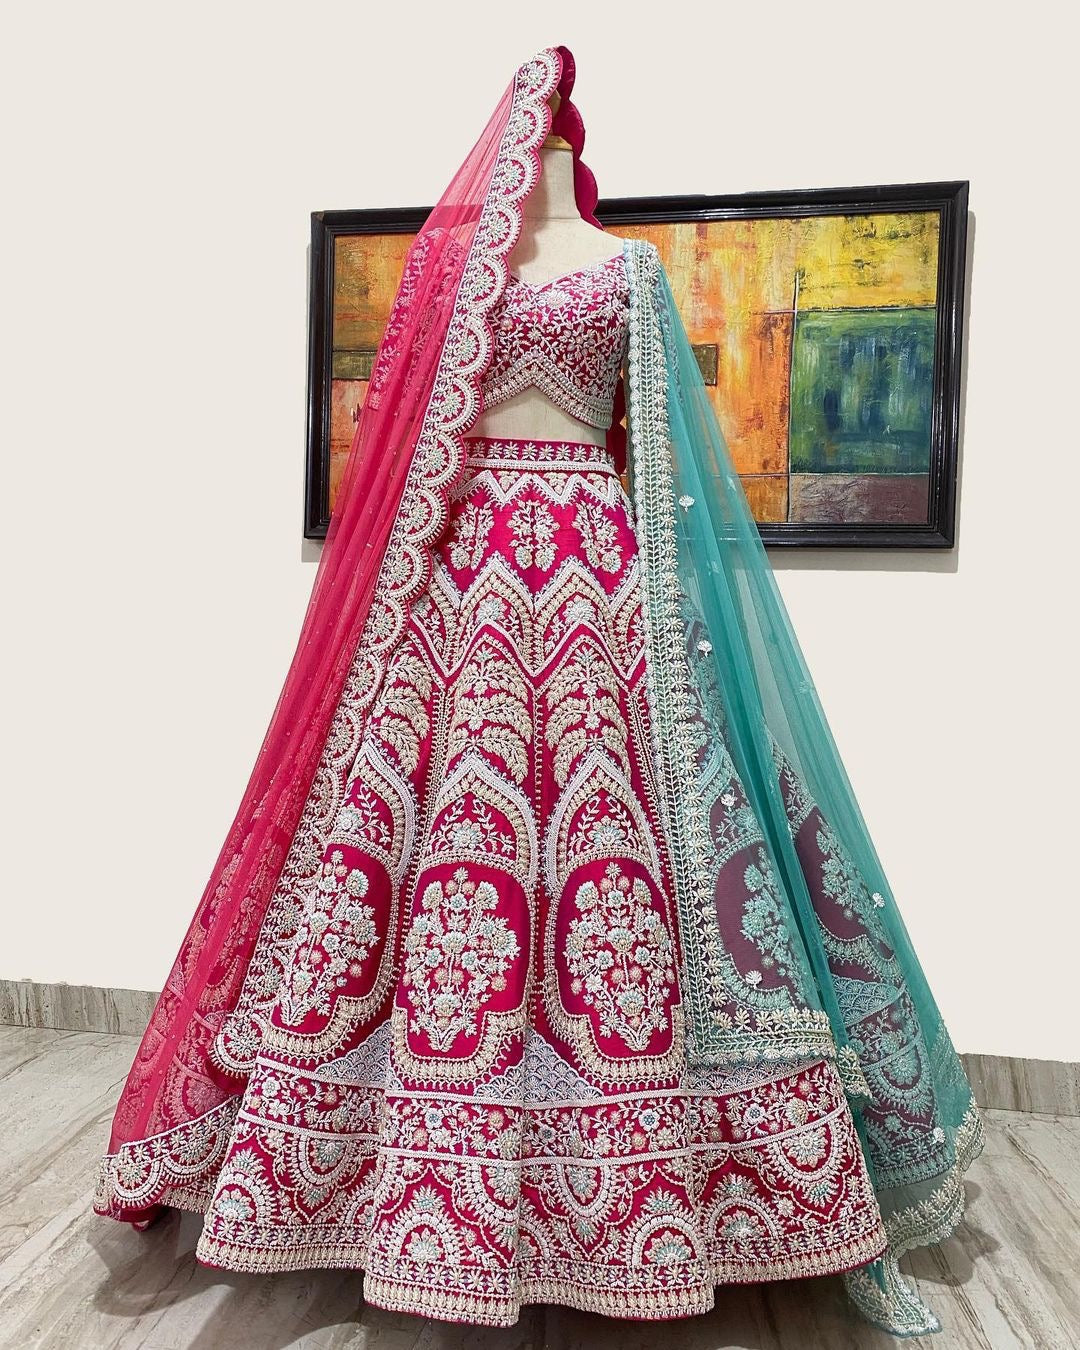 From High-Waist Lehengas To Saree-Drapes, 5 Trendy Bridal Lehenga Designs  For Fashionable Brides | Trends News, Times Now